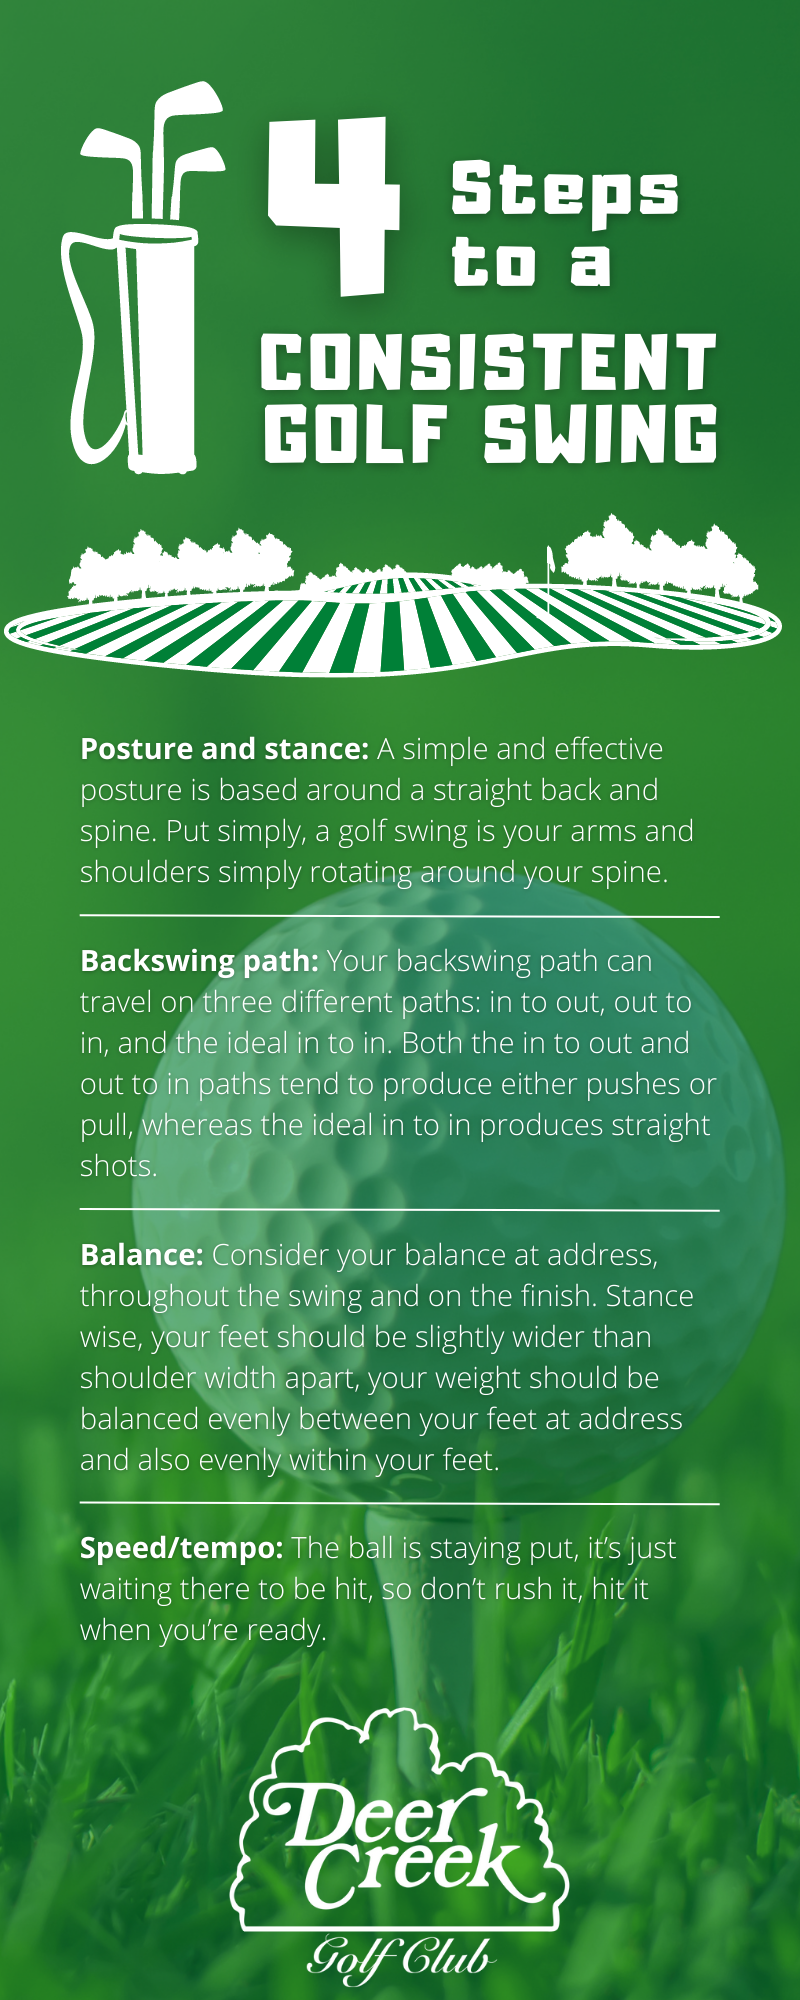 Infographic detailing 4 tips to a consistent golf swing; Features golf-related graphics and a golf ball in the background.